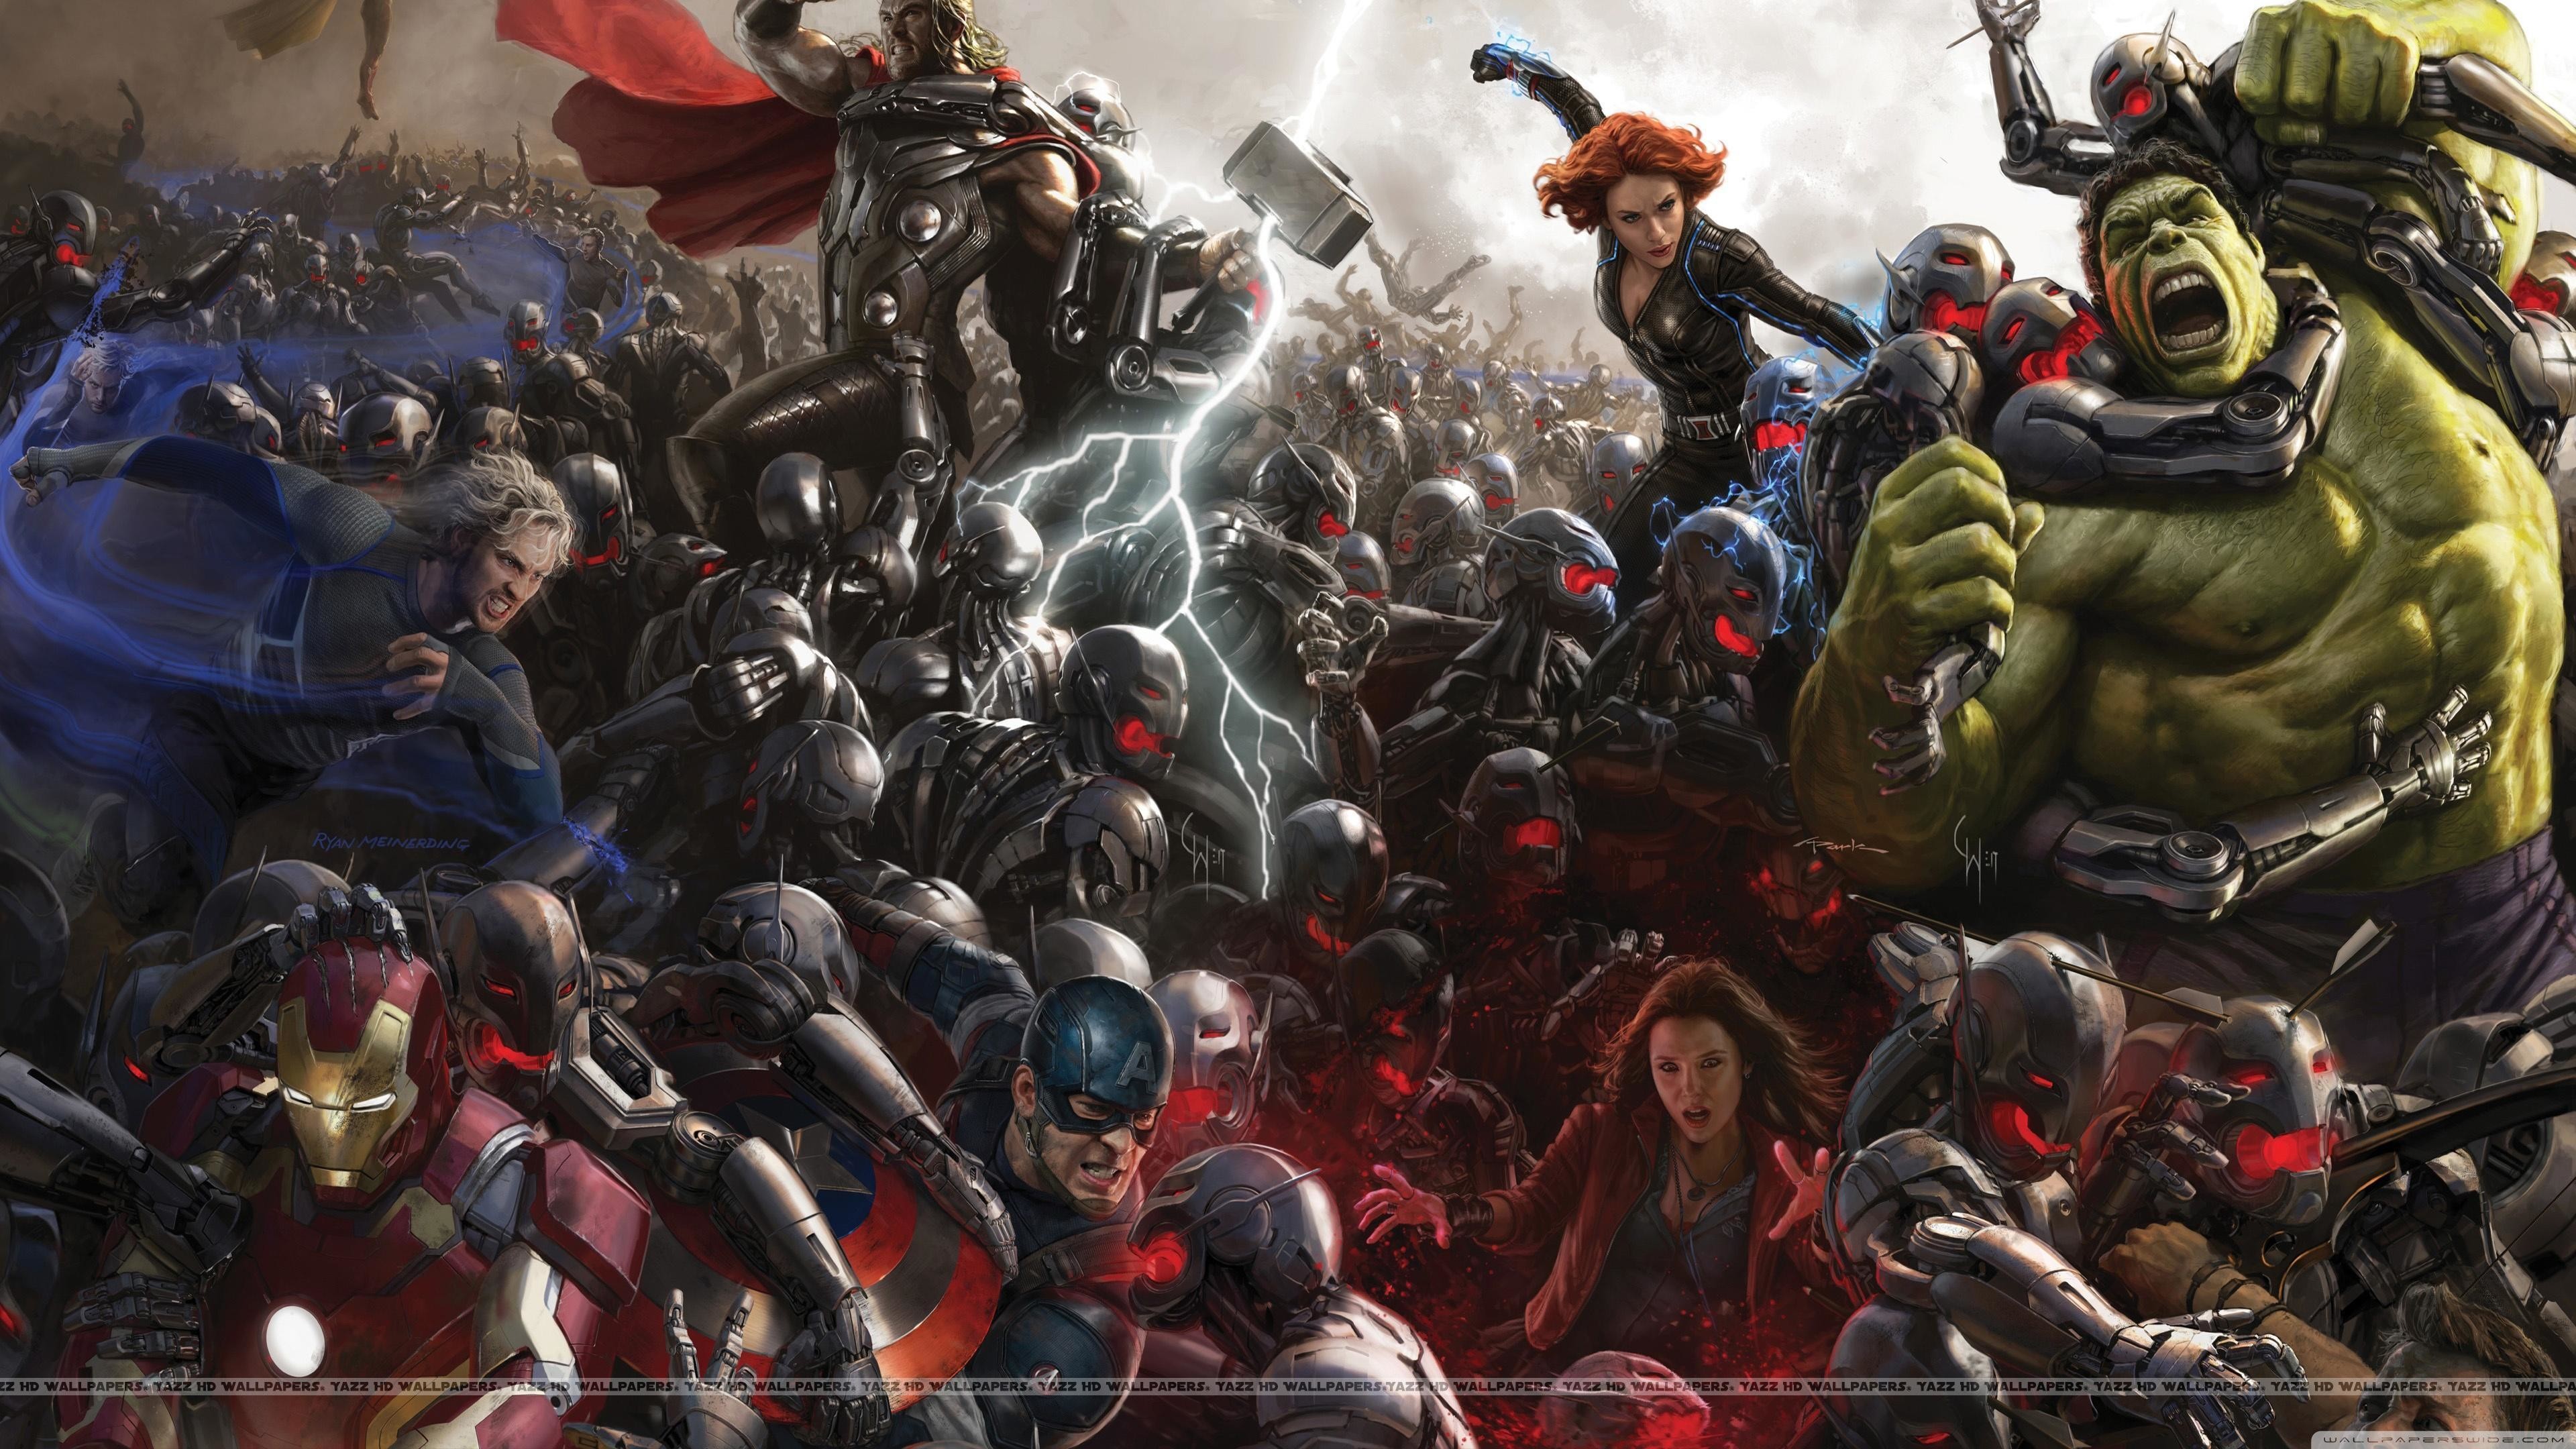 3840x2160 WallpapersWide.com | The Avengers HD Desktop Wallpapers for .